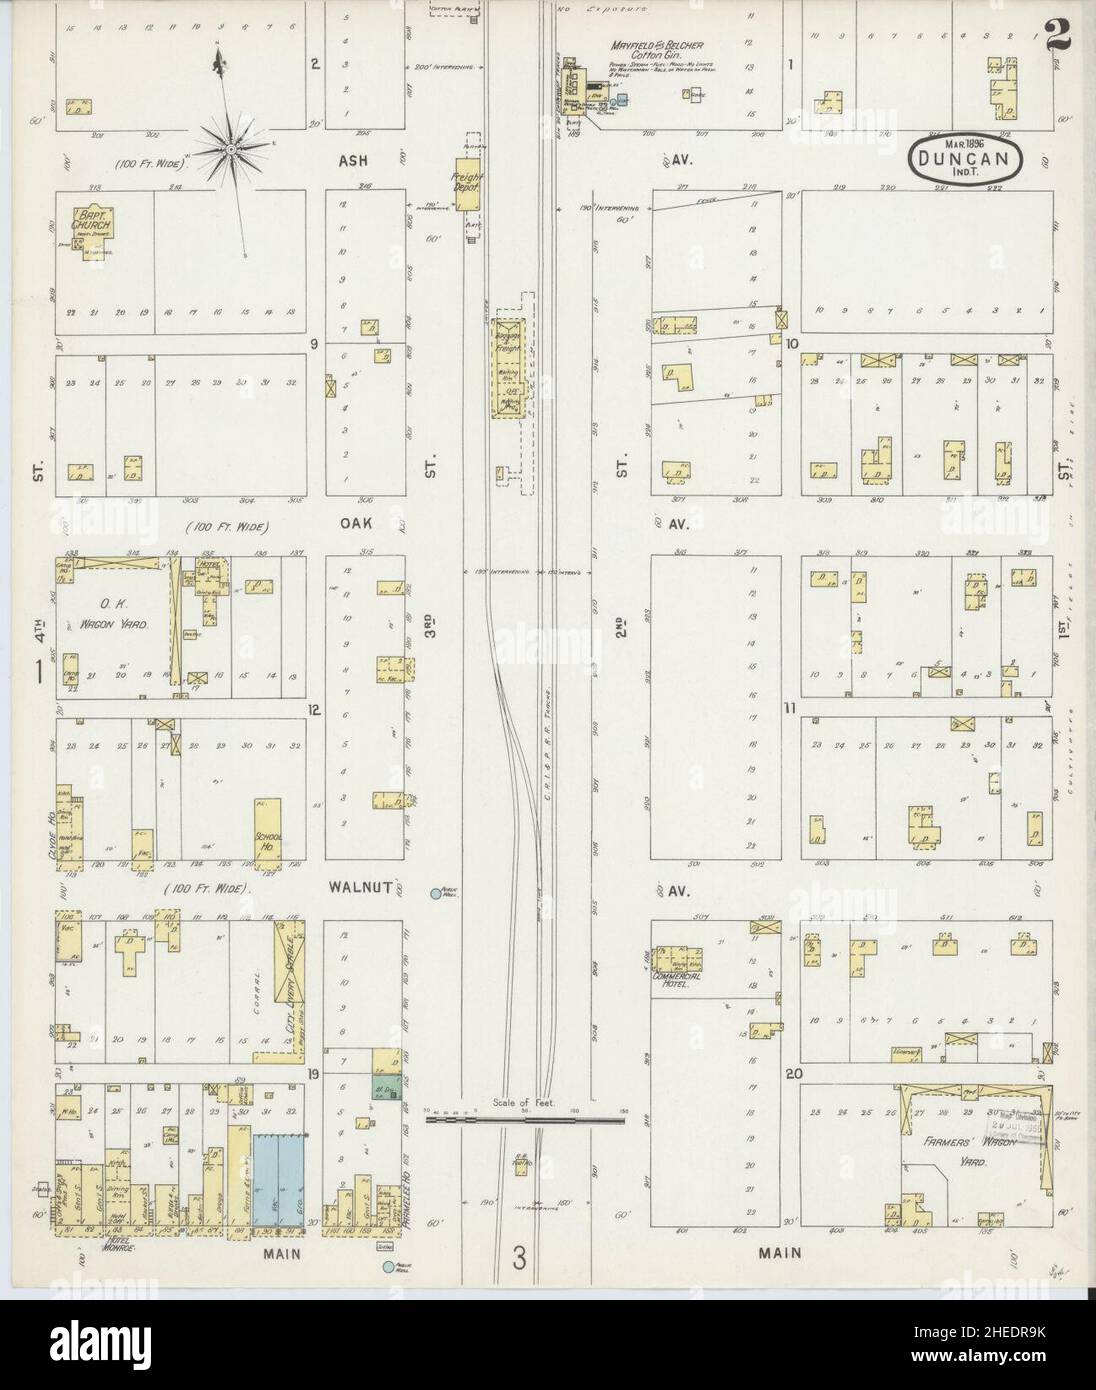 Sanborn Fire Insurance Map from Duncan, Stephens County, Oklahoma. Stock Photo